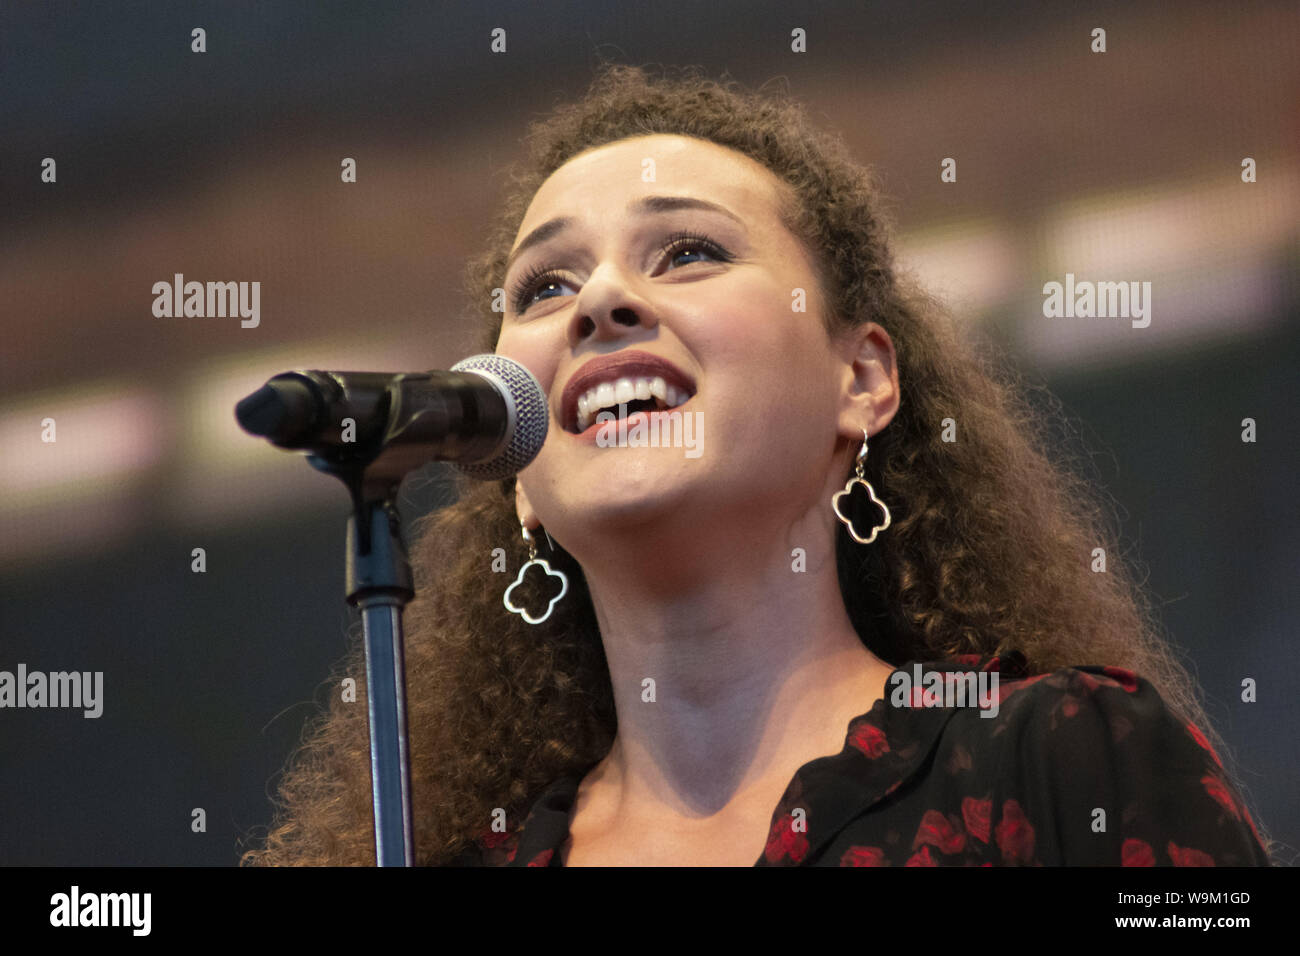 Chicago, IL, USA. 12th Aug, 2019. Despite reports of serious storms, a massive crowd gathered in Millennium Park, Chicago to see the free Broadway in Chicago concert on August 12, 2019. The lead singers from 13 musicals wowed the audience with their performances. ABC-TV reporter Janet Davies and Teatro Zinzanni's Frank Ferrante were the MCs for this event. The show previewed some of the shows coming to Chicago including Frozen, Jesus Christ Superstar, Mean Girls and the Donna Summer Musical. Pictured: Shereen Ahmed from My Fair Lady. Credit: Karen I. Hirsch/ZUMA Wire/Alamy Live News Stock Photo